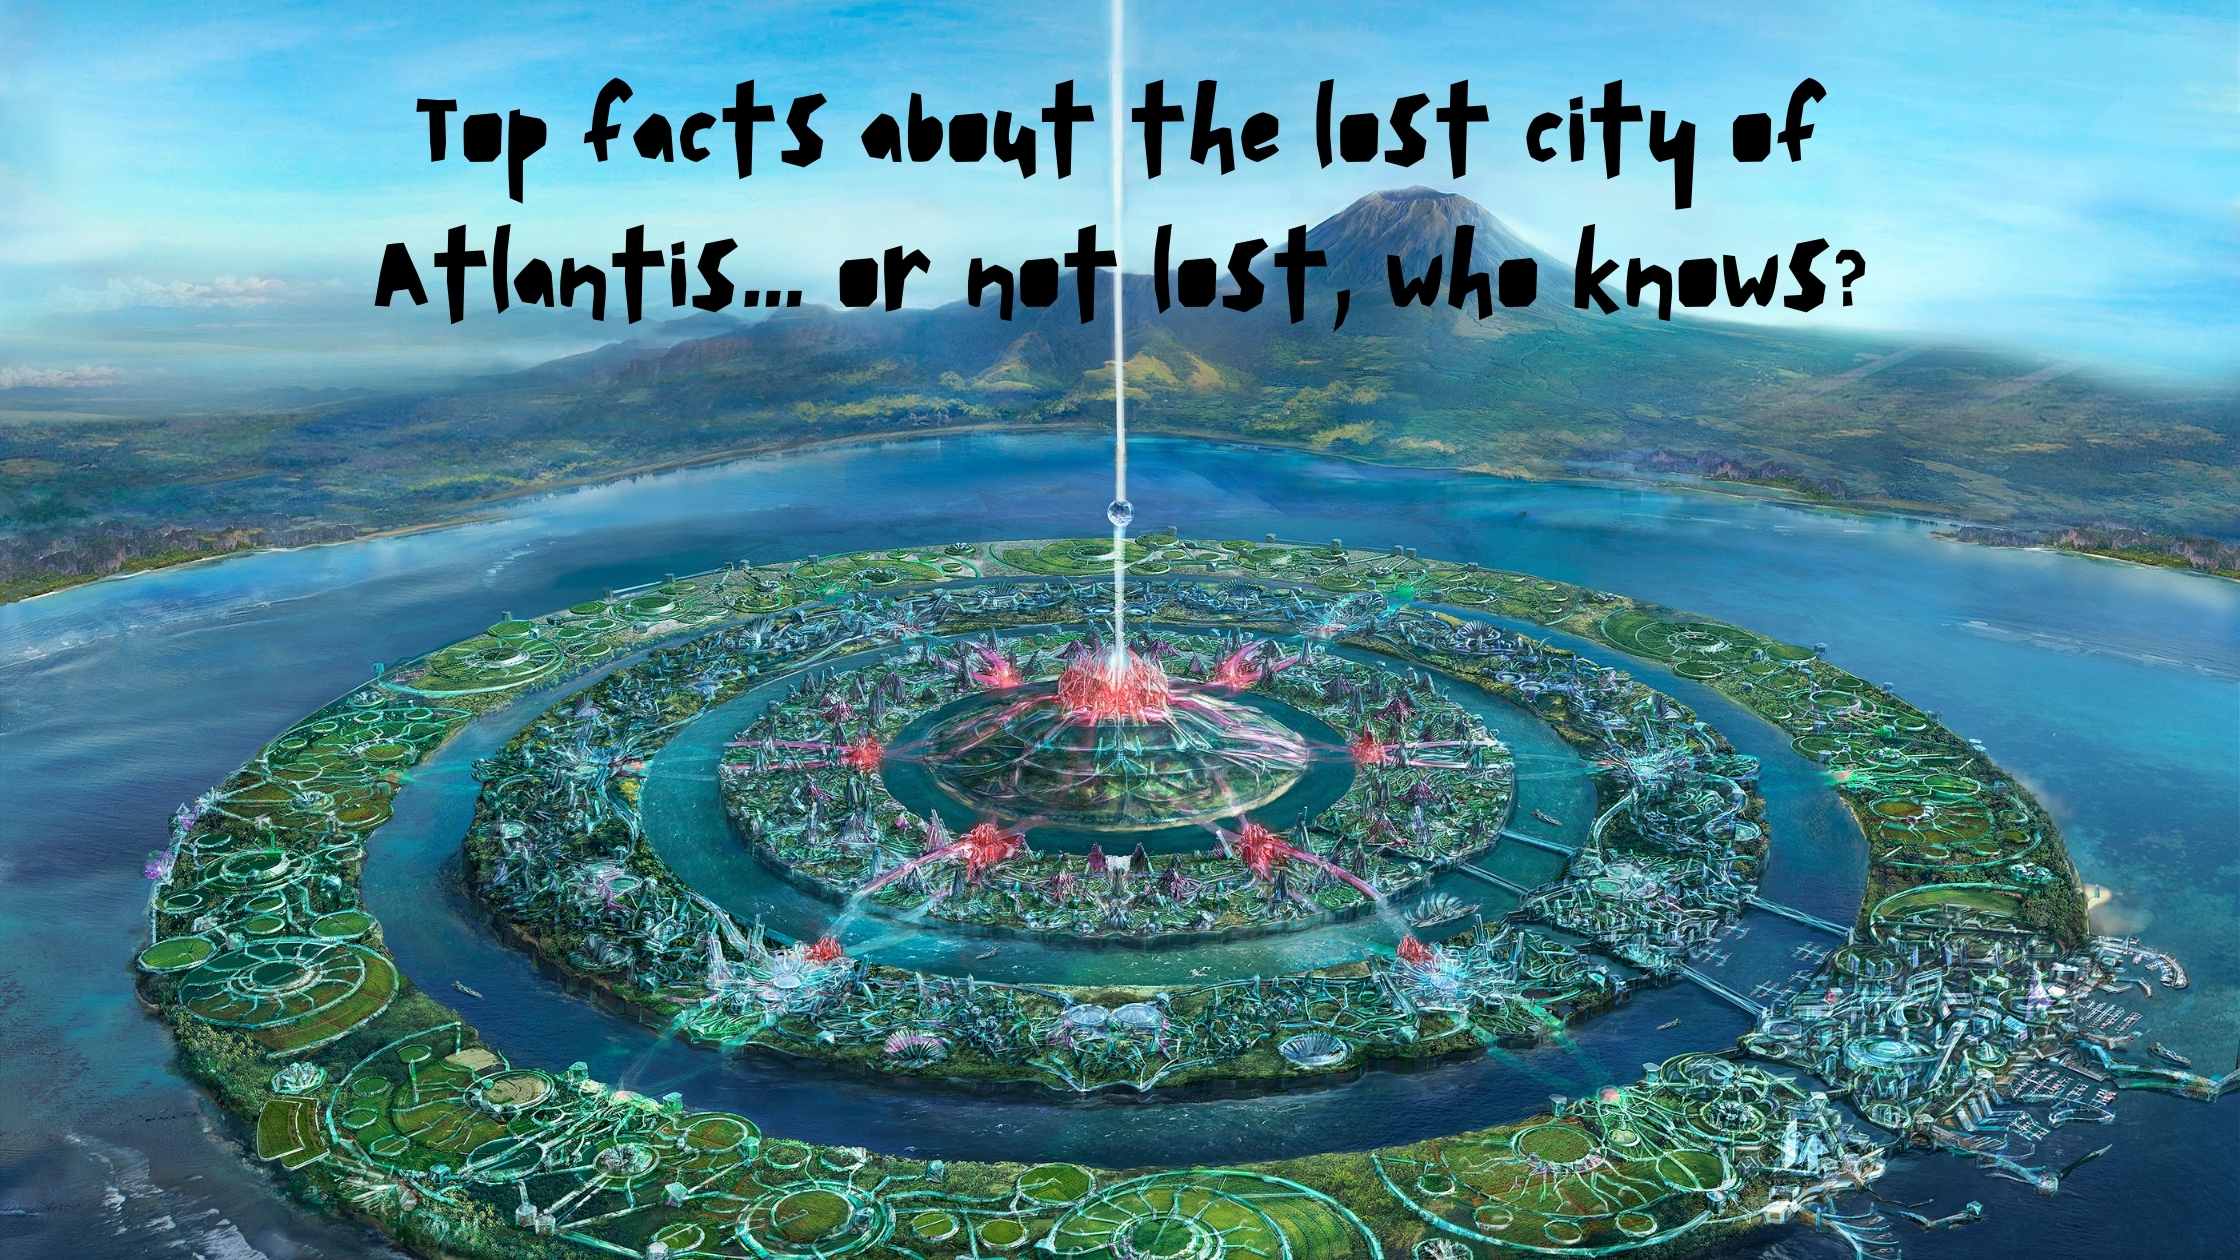 Top facts about the lost city of Atlantis… or not lost, who knows?